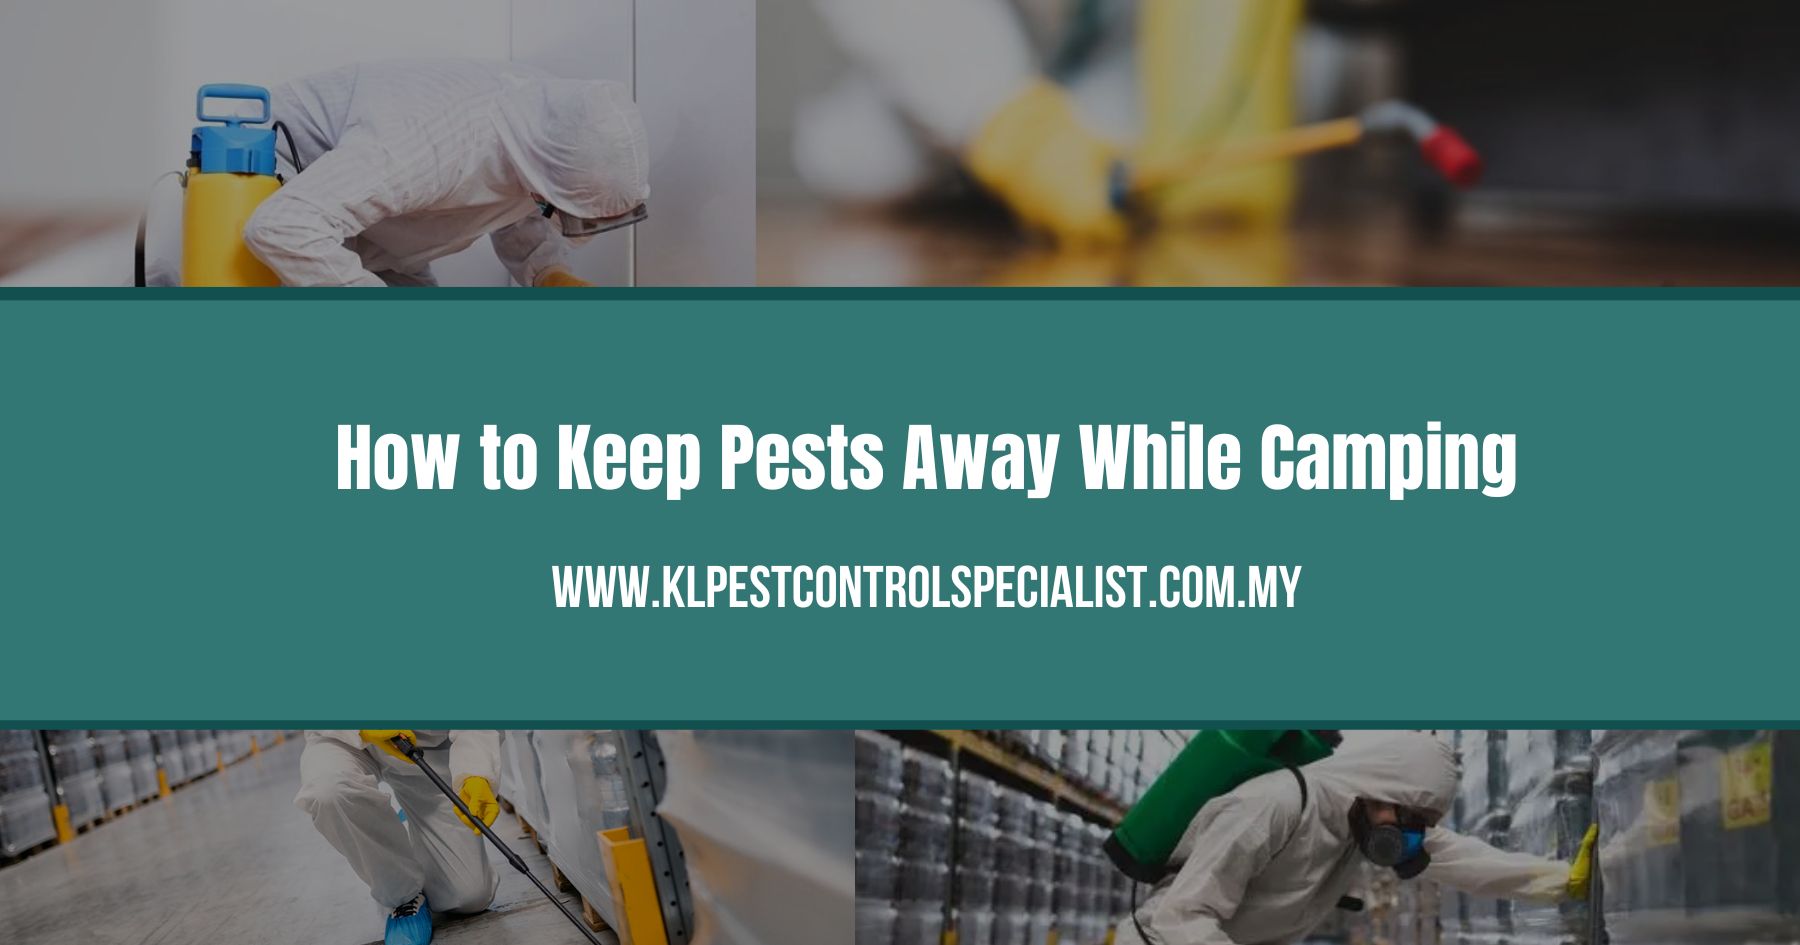 How to Keep Pests Away While Camping